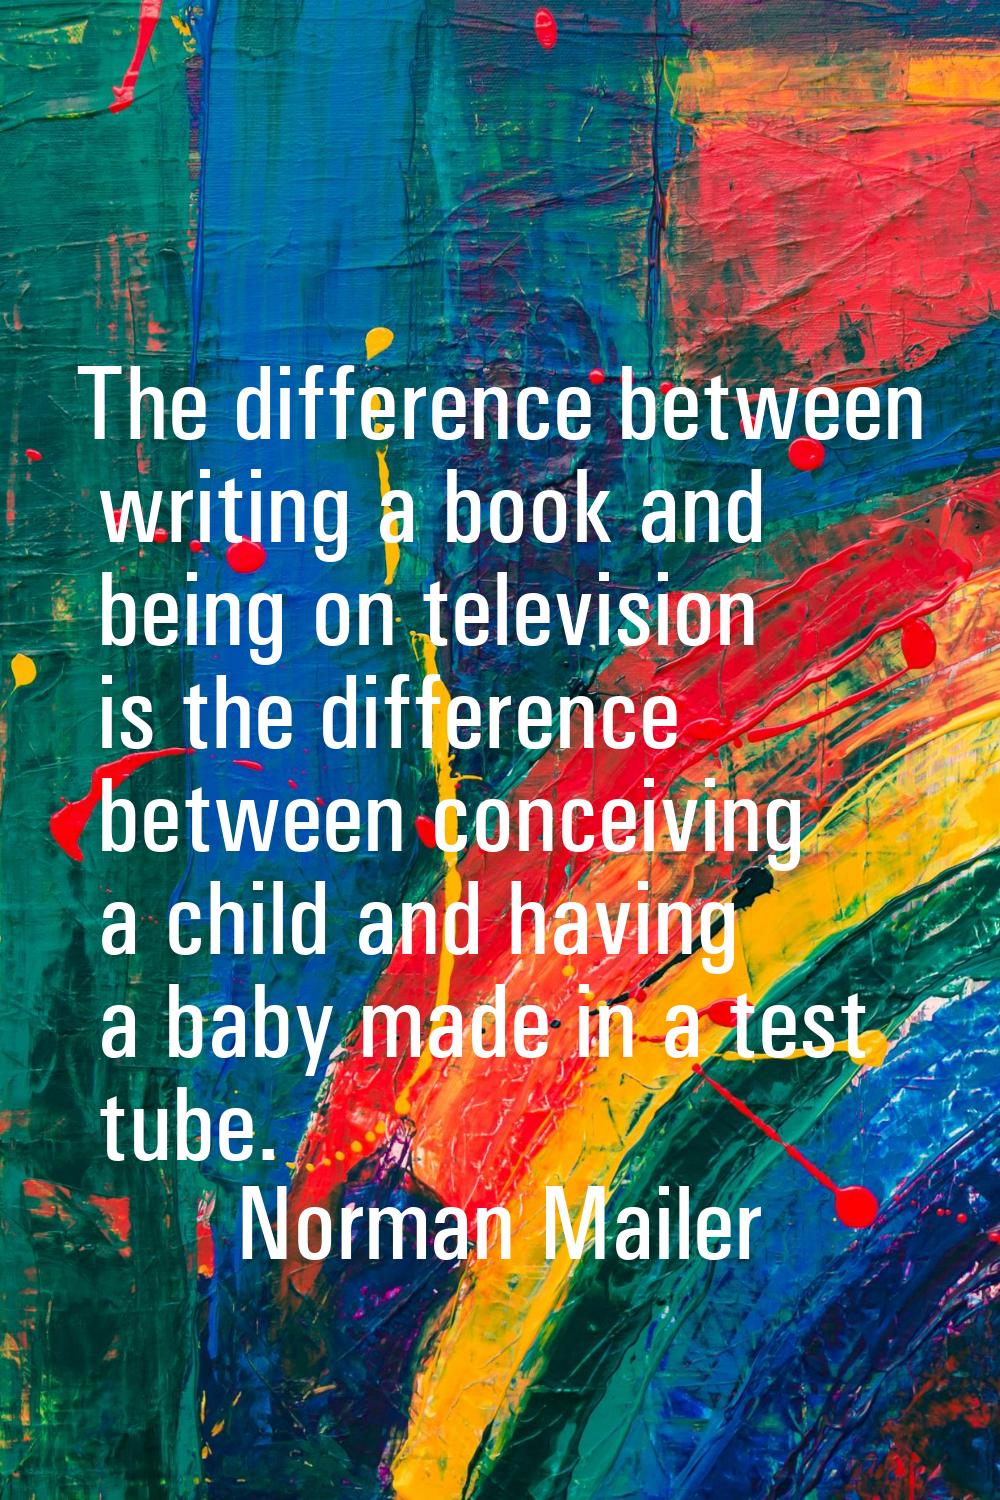 The difference between writing a book and being on television is the difference between conceiving 